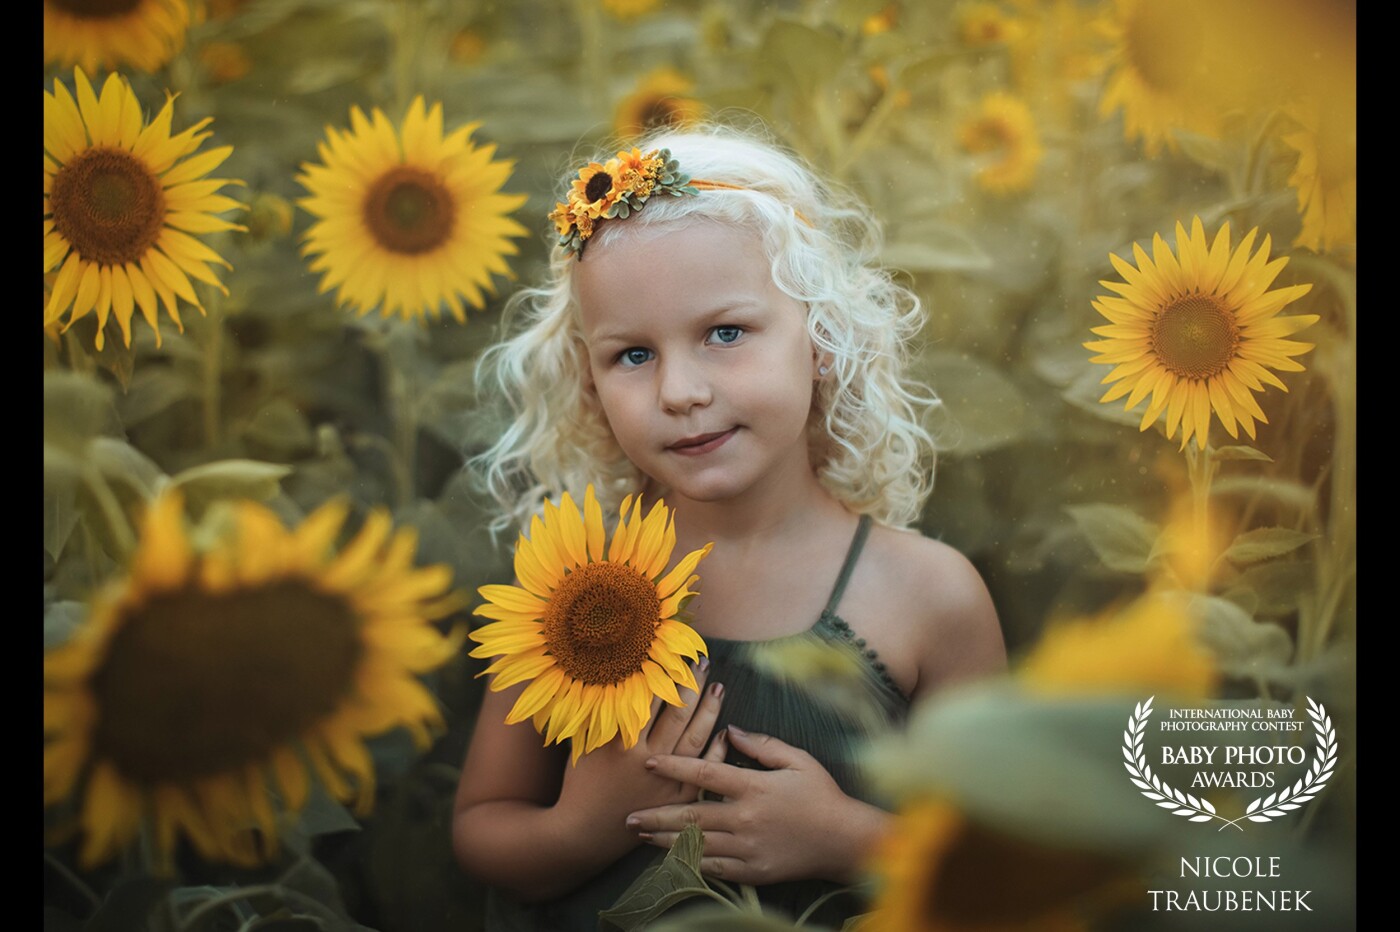 "The Message of a Sunflower". May the sunflower smile, accompany your way, her radiant face brightens your day, the bright yellow your heart. Give happiness and warmth and remind you to seek and see the light and leave the shadows behind you❣️